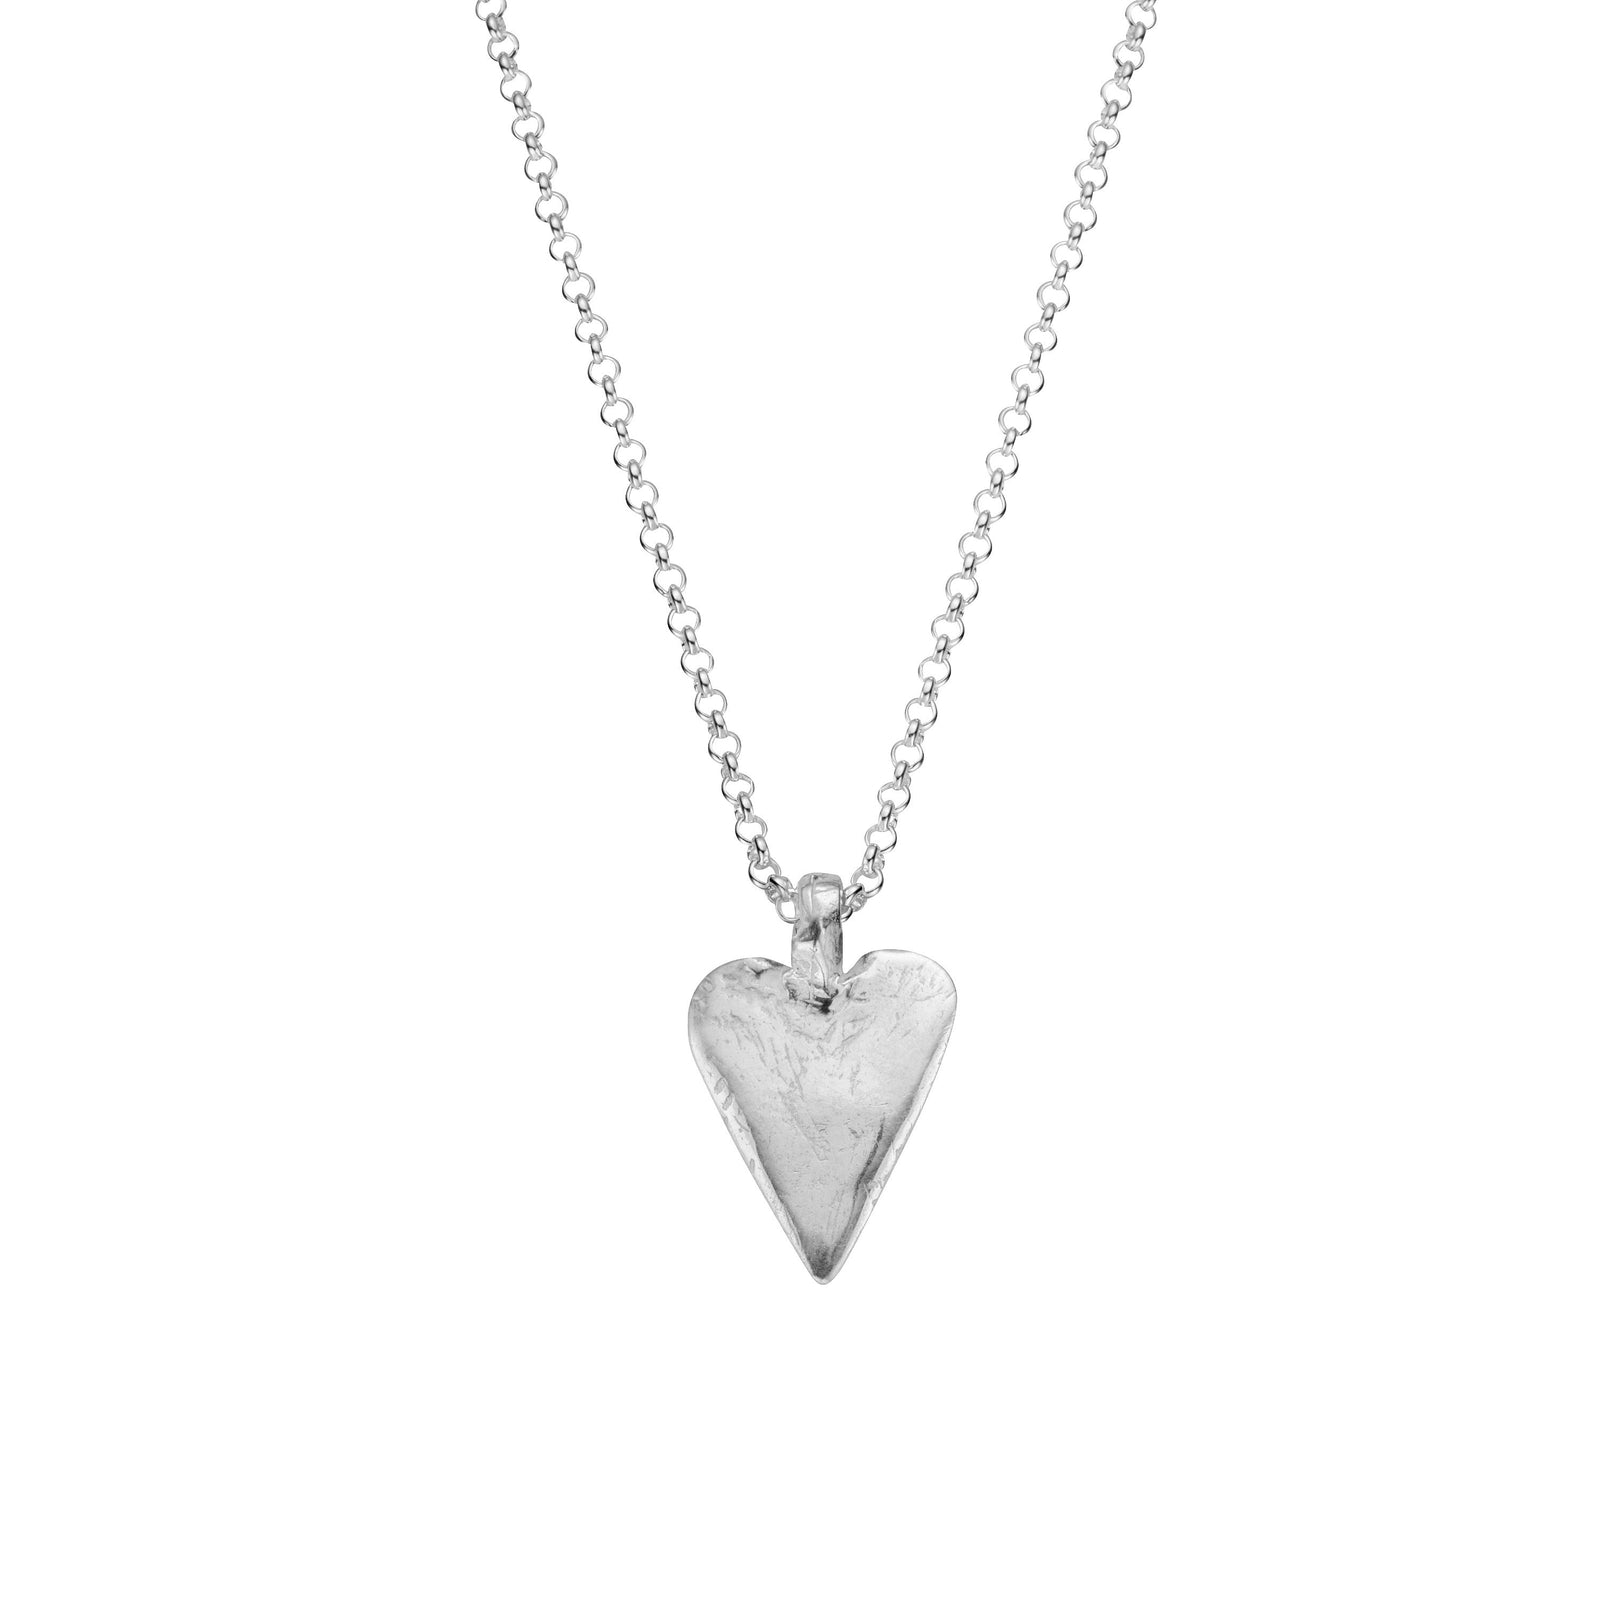 Silver Midi Heart Necklace with Handwriting